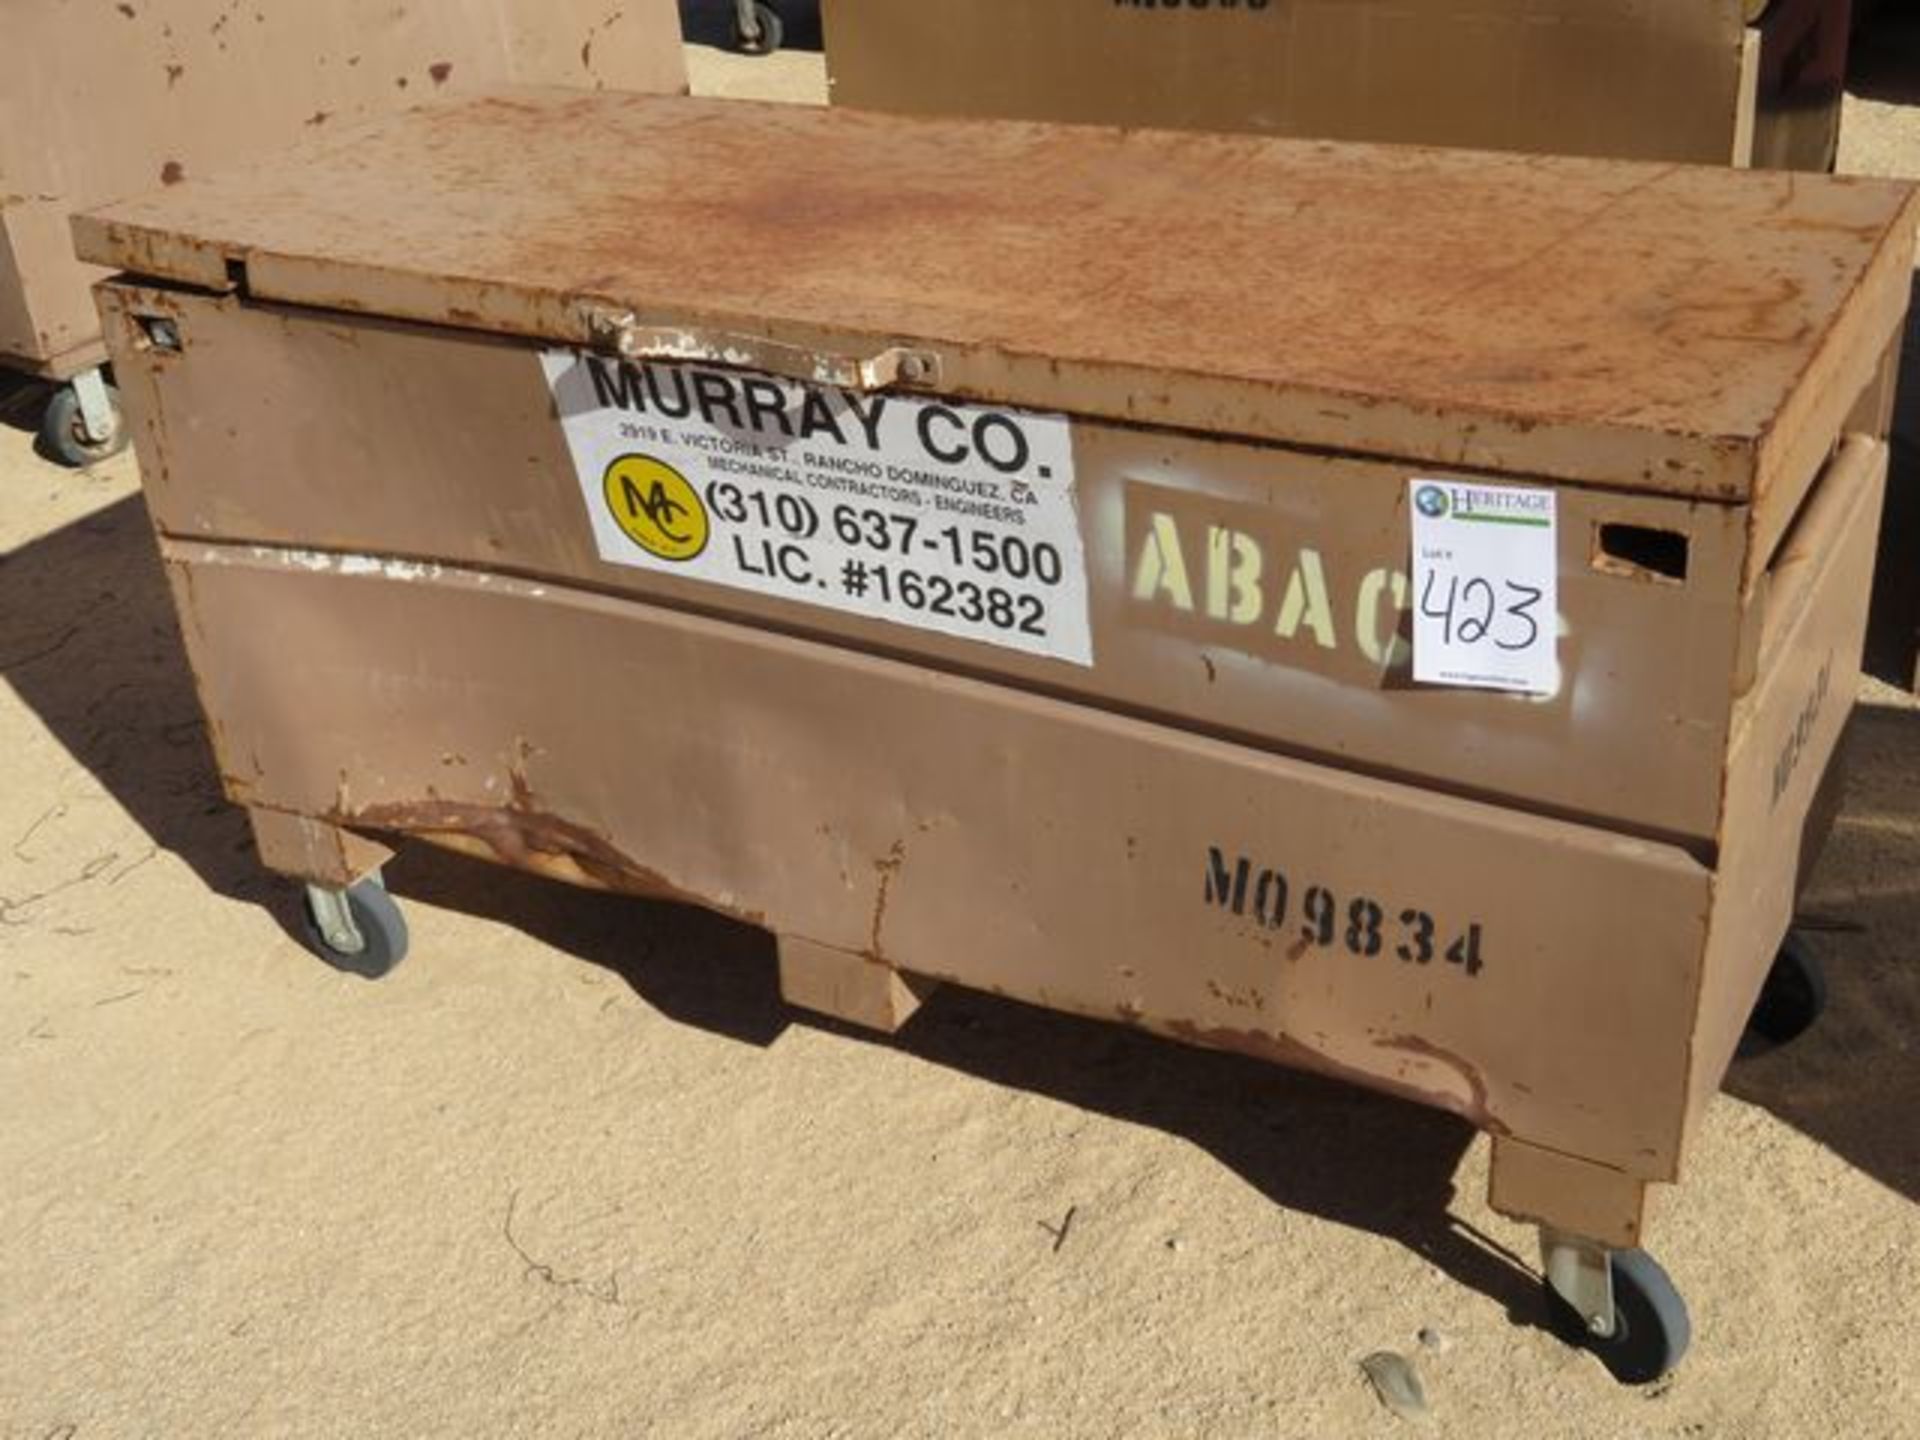 Murray Tool Chest. 60" x 24" x 33", on Castors, w/ Contents of Safety Harnesses. Asset Located at